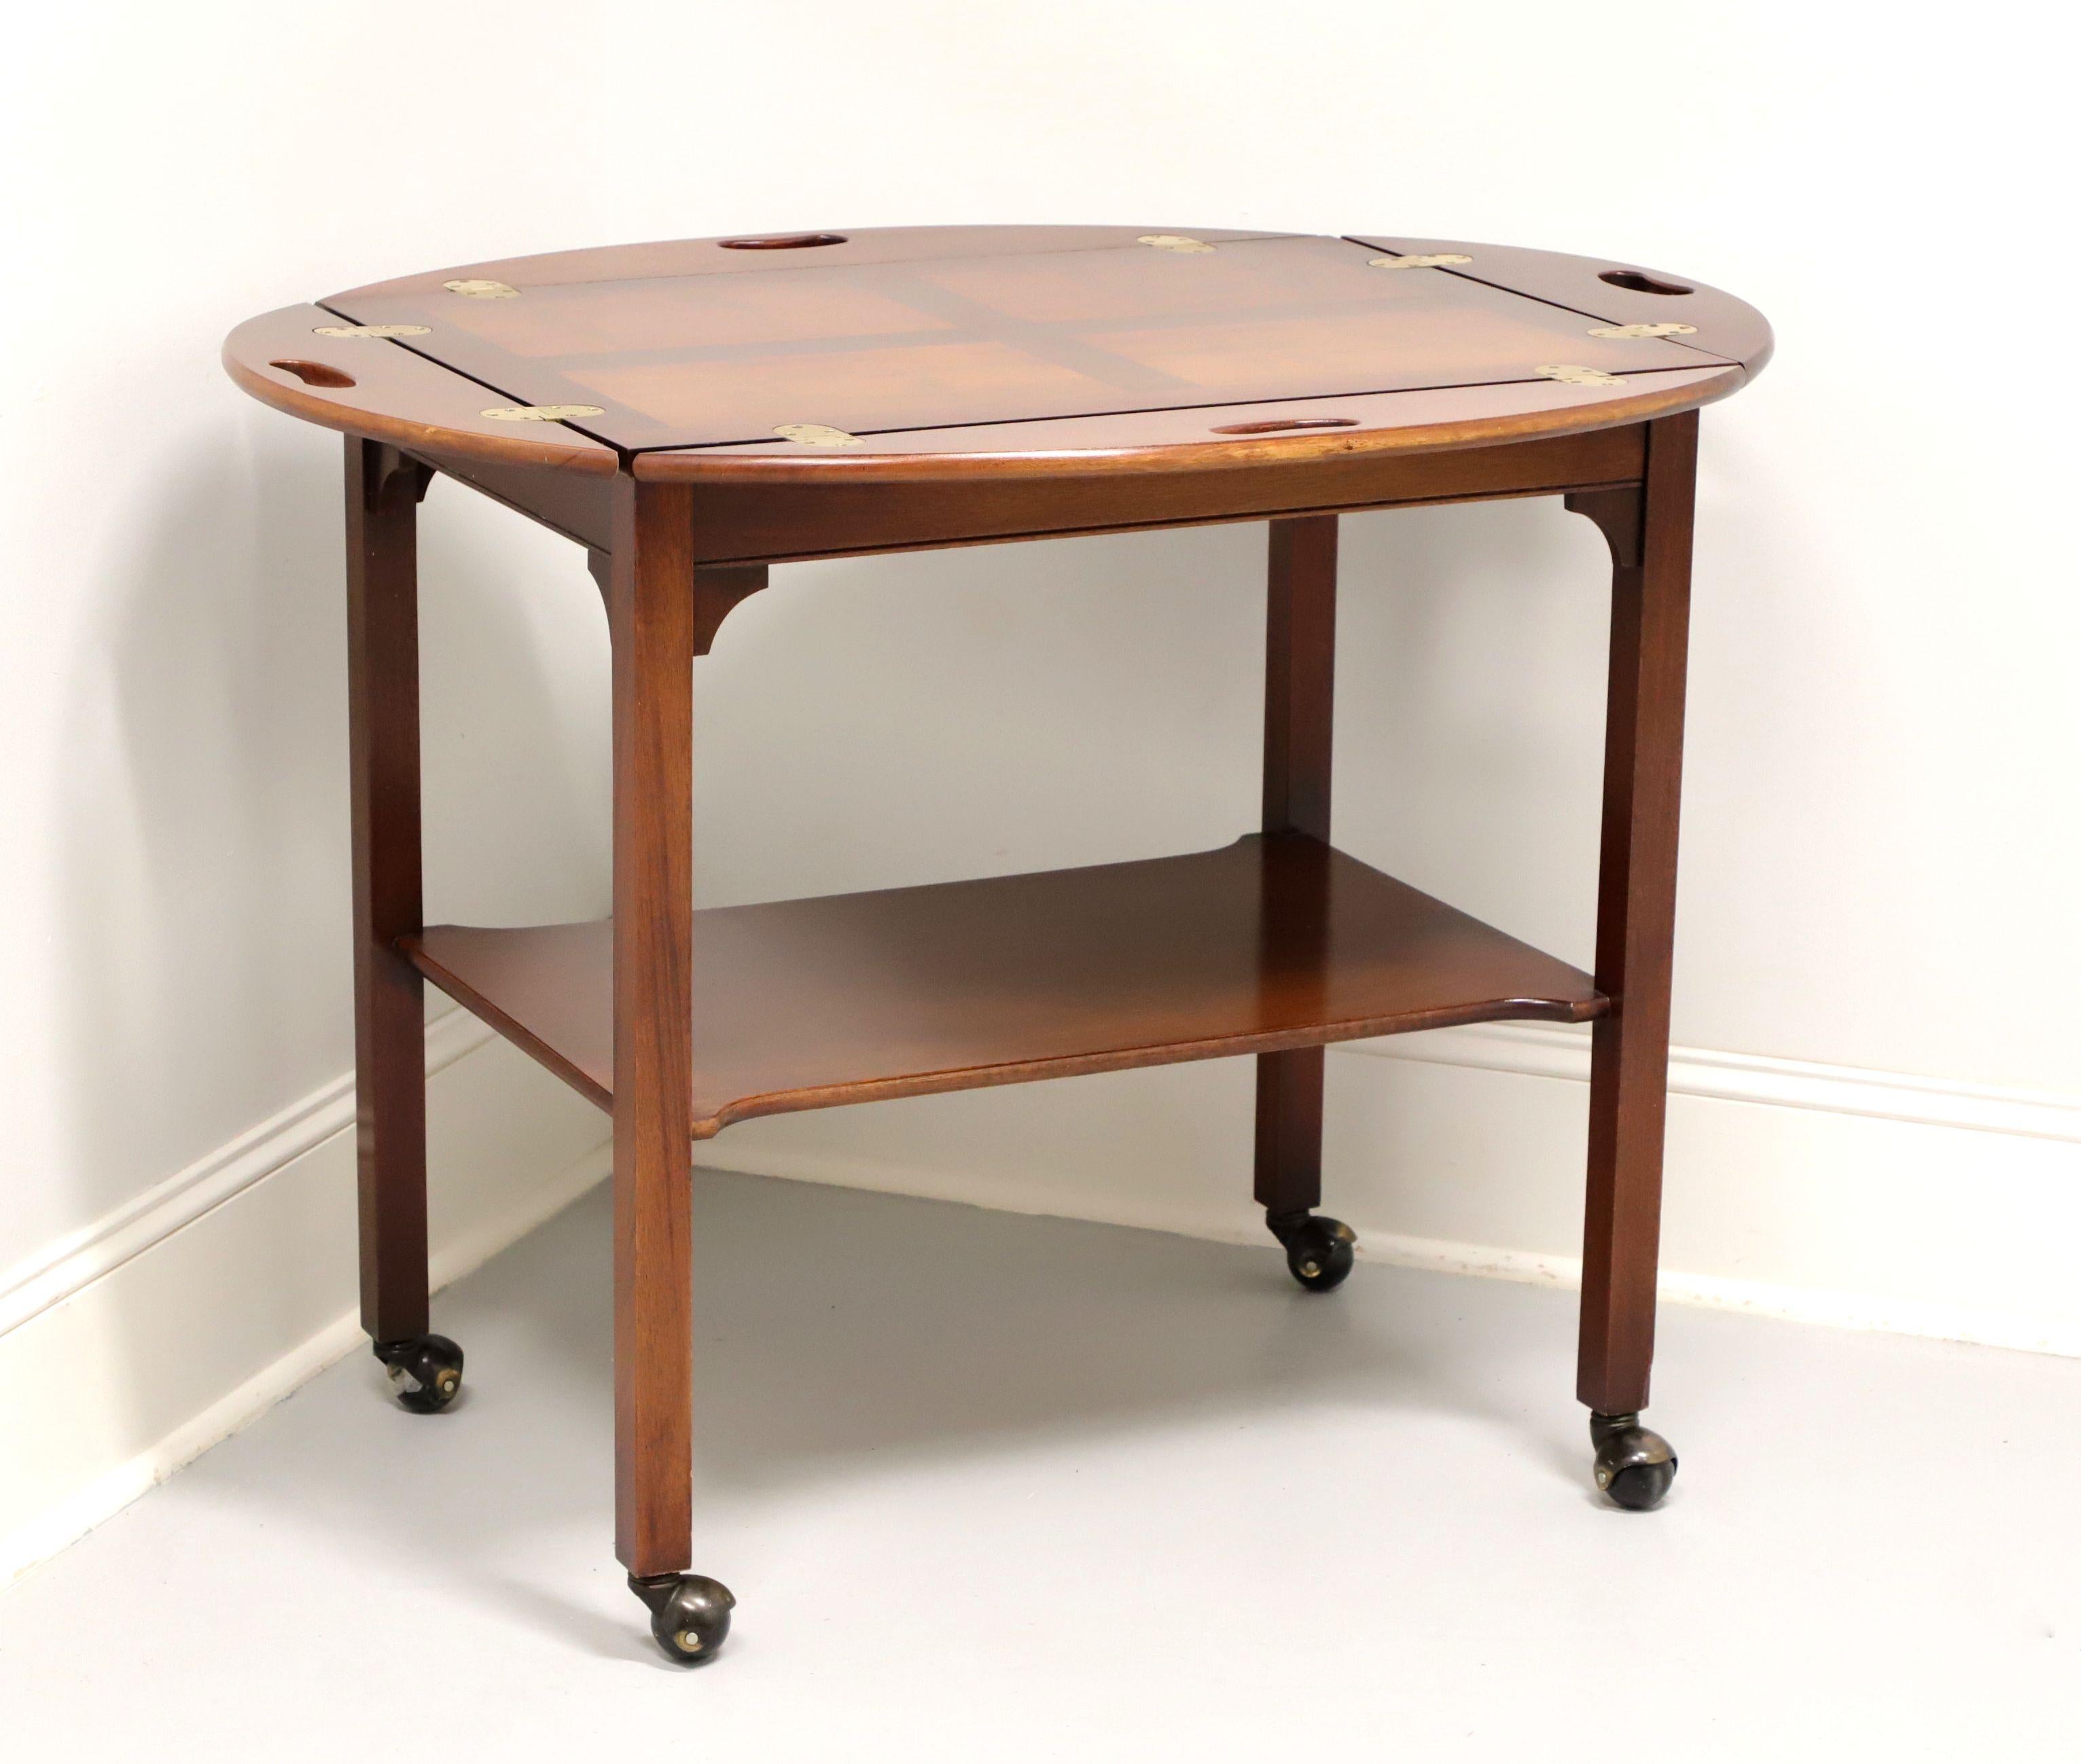 A Chippendale style Butler's cart, unbranded, likely Hickory Furniture Company. Mahogany with cross banded inlaid yew wood top, brass hinge hardware, under tier shelf, straight legs, and on casters. Features four fold down sides with carved open